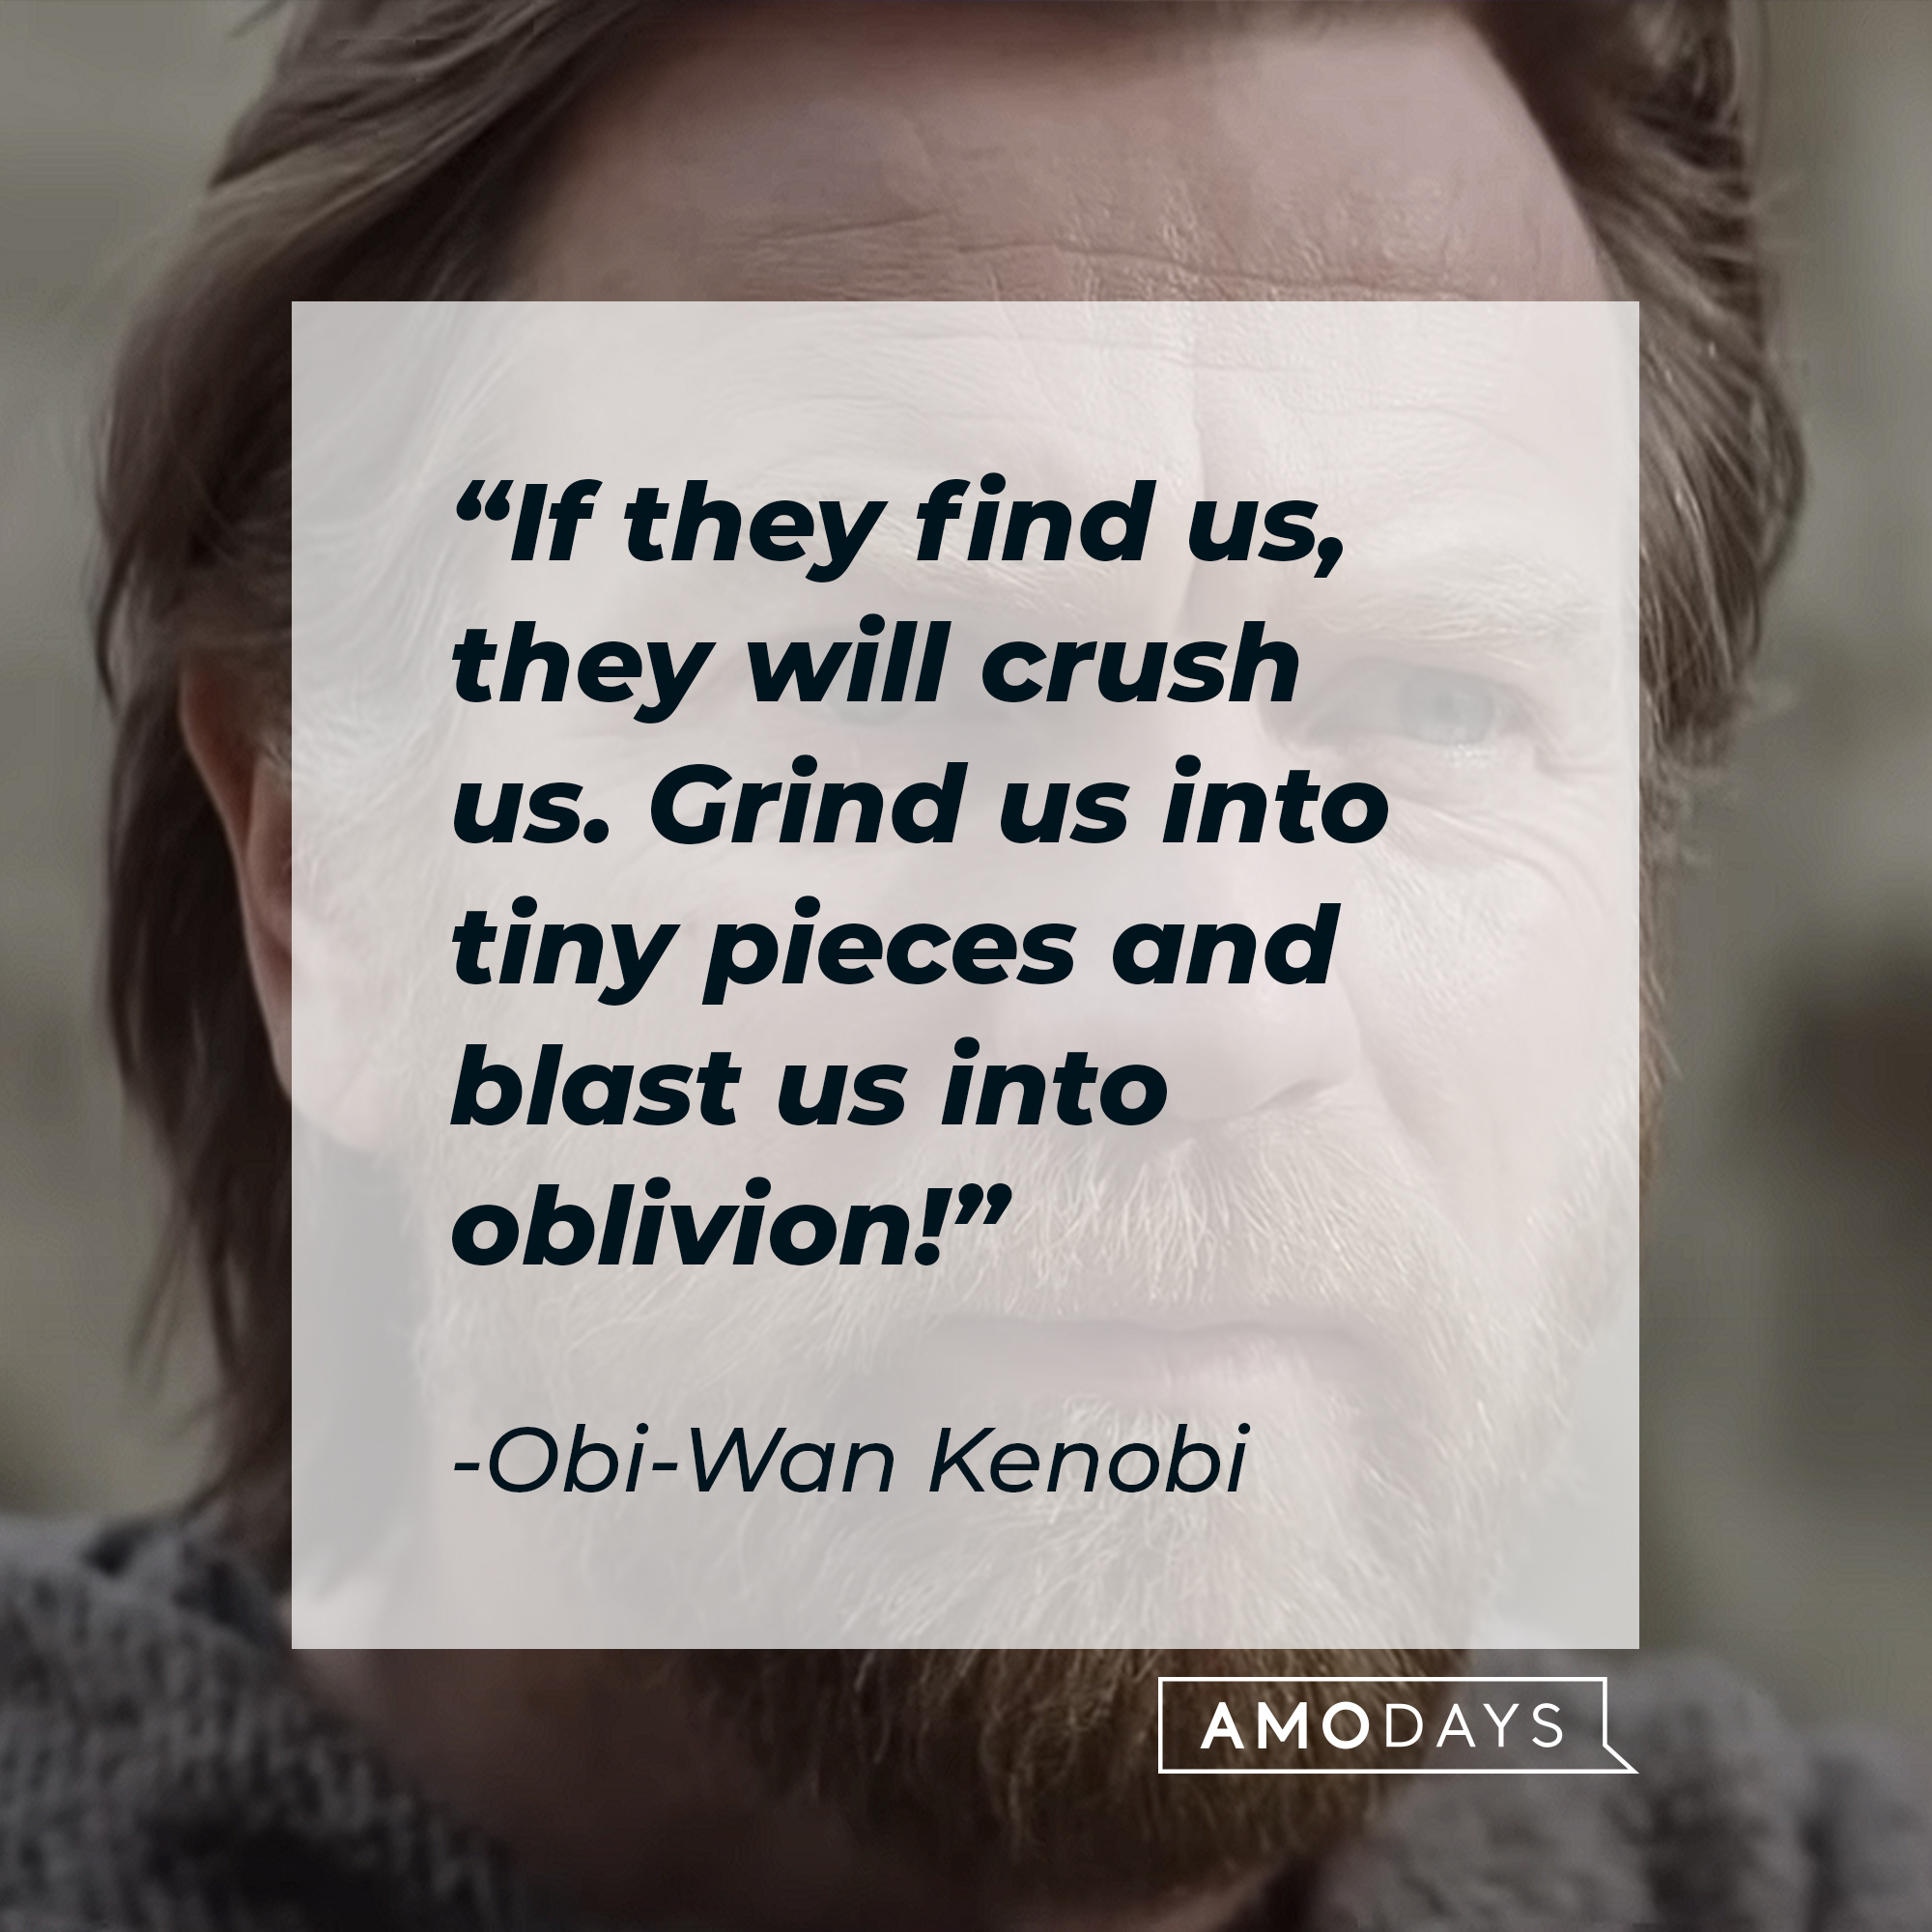 Obi-Wan Kenobi with his quote: "If they find us, they will crush us. Grind us into tiny pieces and blast us into oblivion!" | Source: Youtube/StarWars